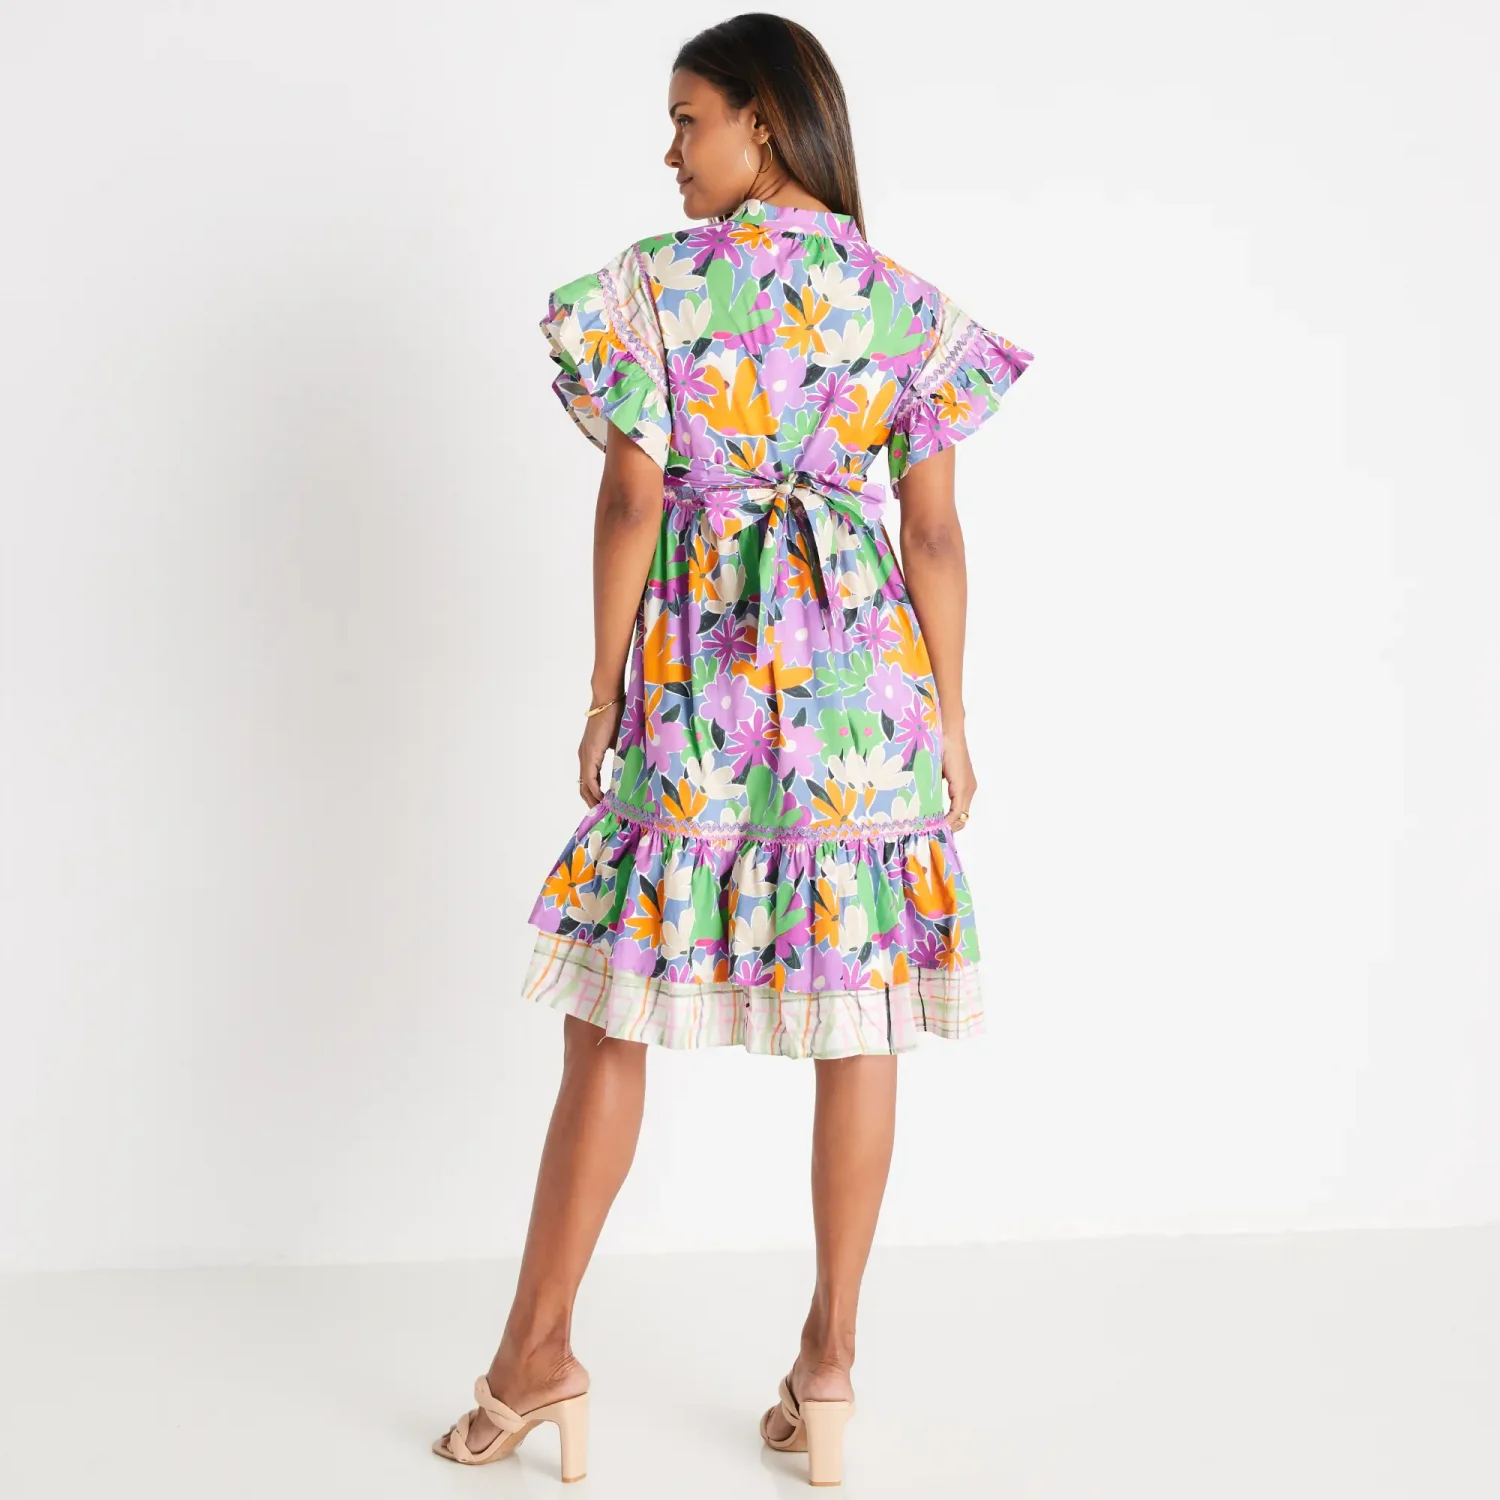 CeliaB brand contemporary and stylish maternity friendly floral printed dresses